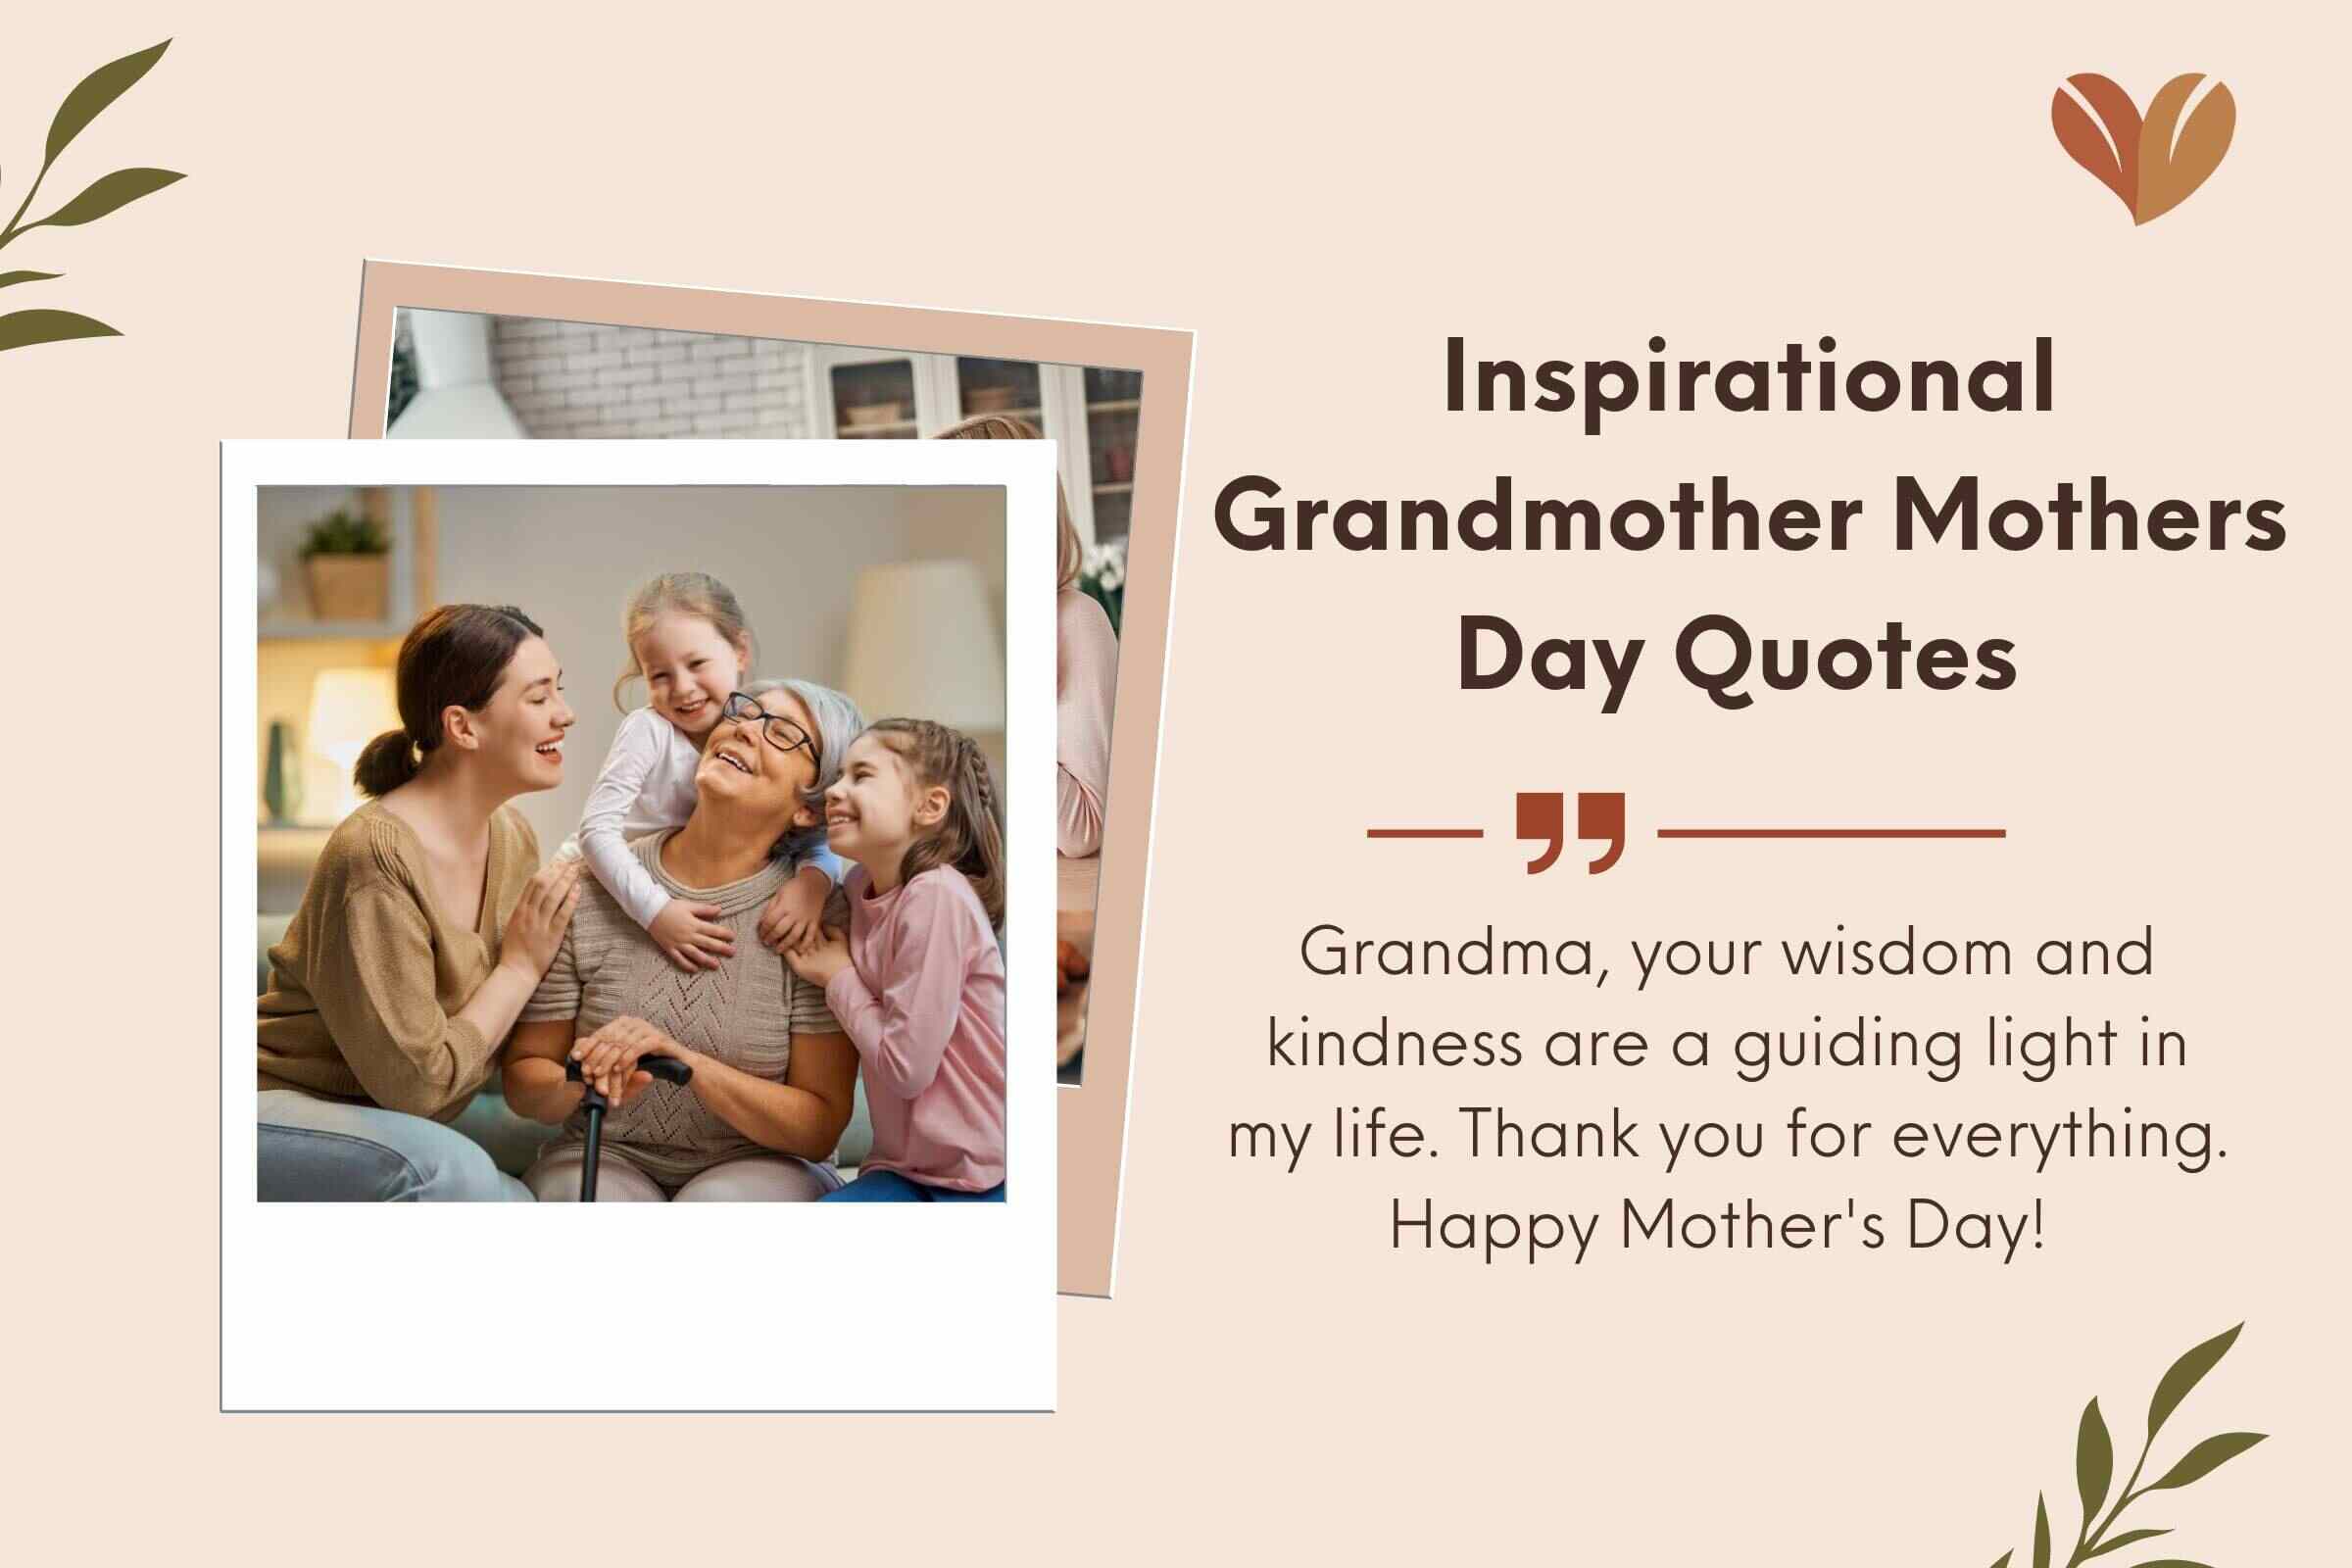 Inspirational Grandmother Mothers Day Quotes 